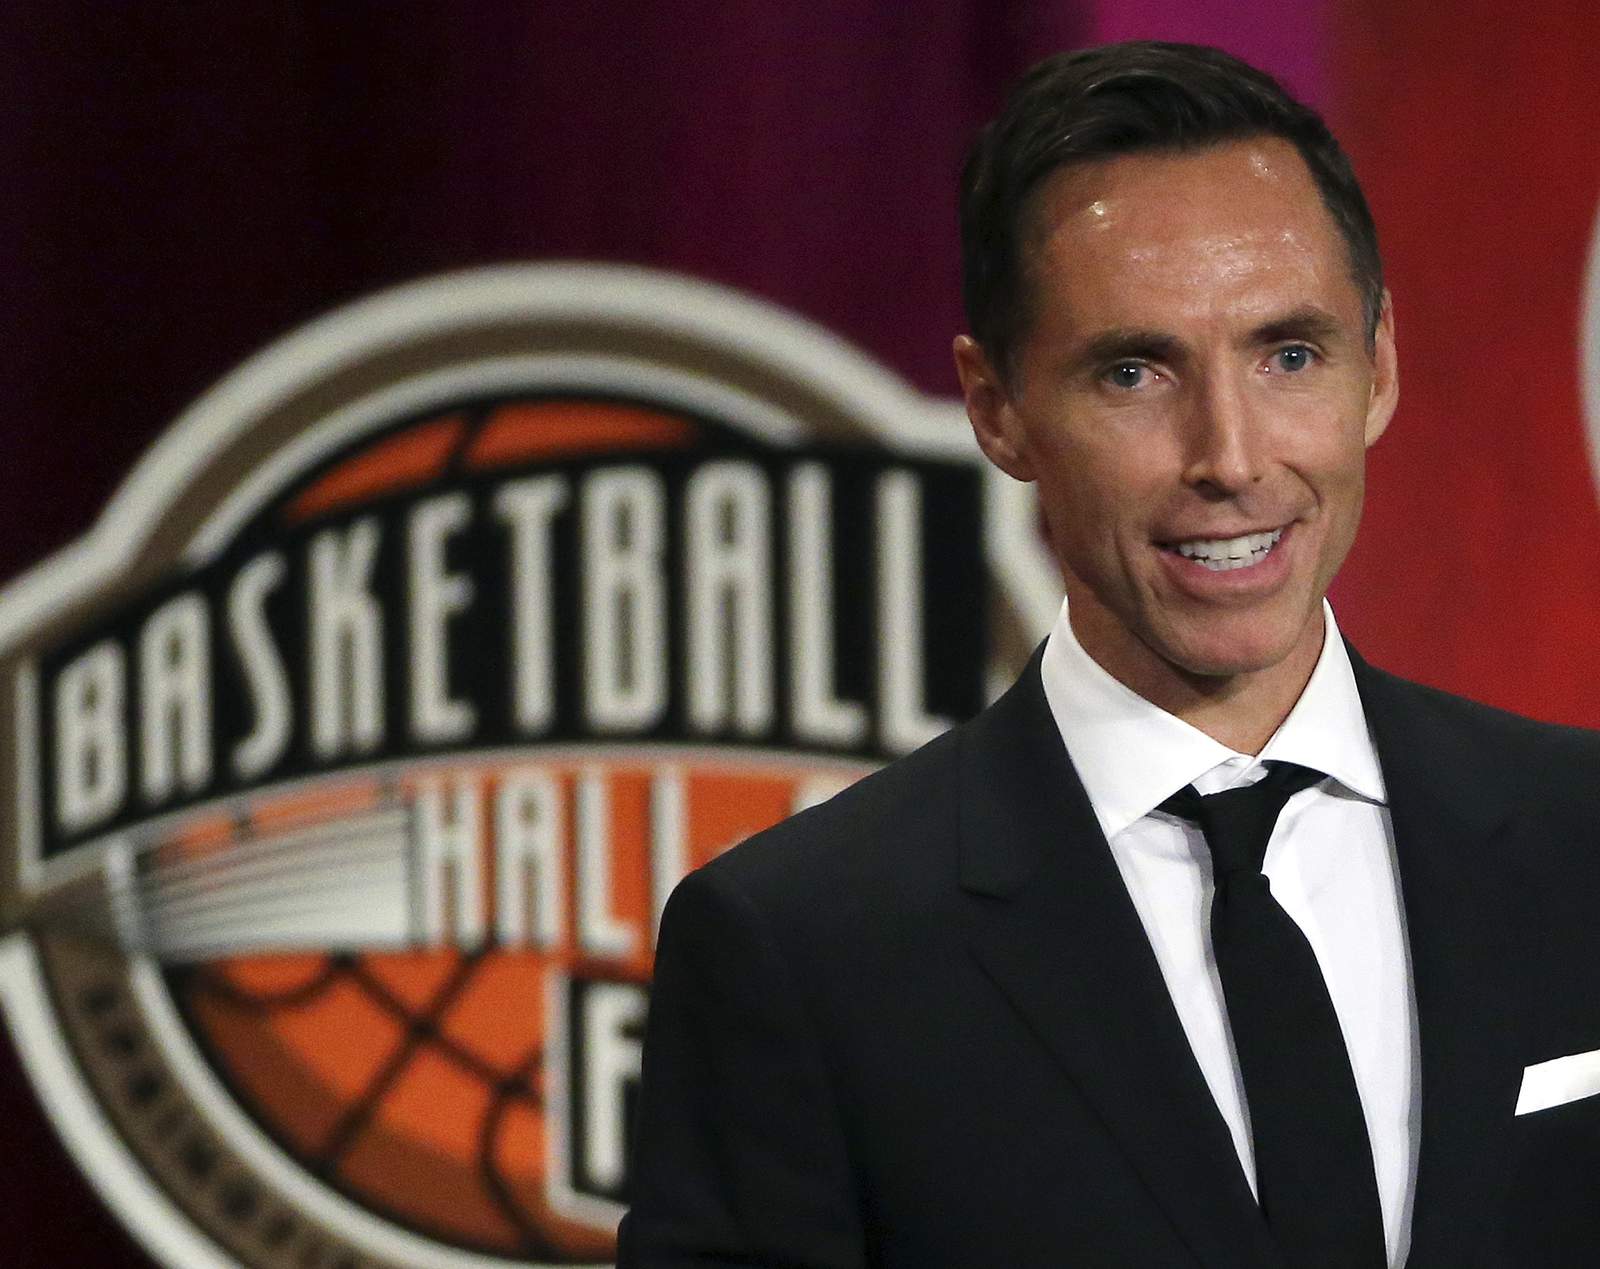 Steve Nash eager to get started on new career as Nets coach